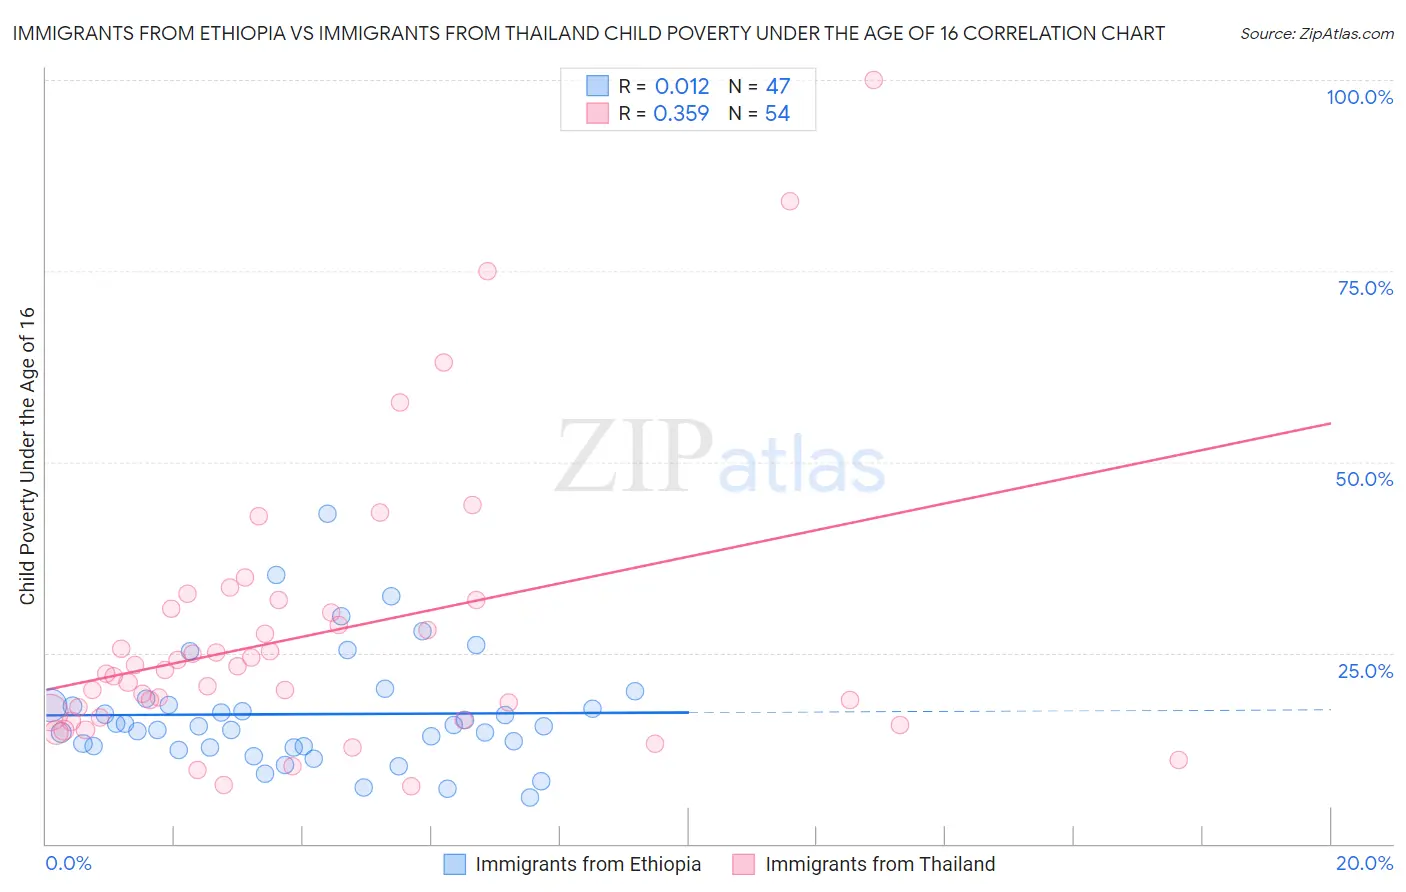 Immigrants from Ethiopia vs Immigrants from Thailand Child Poverty Under the Age of 16